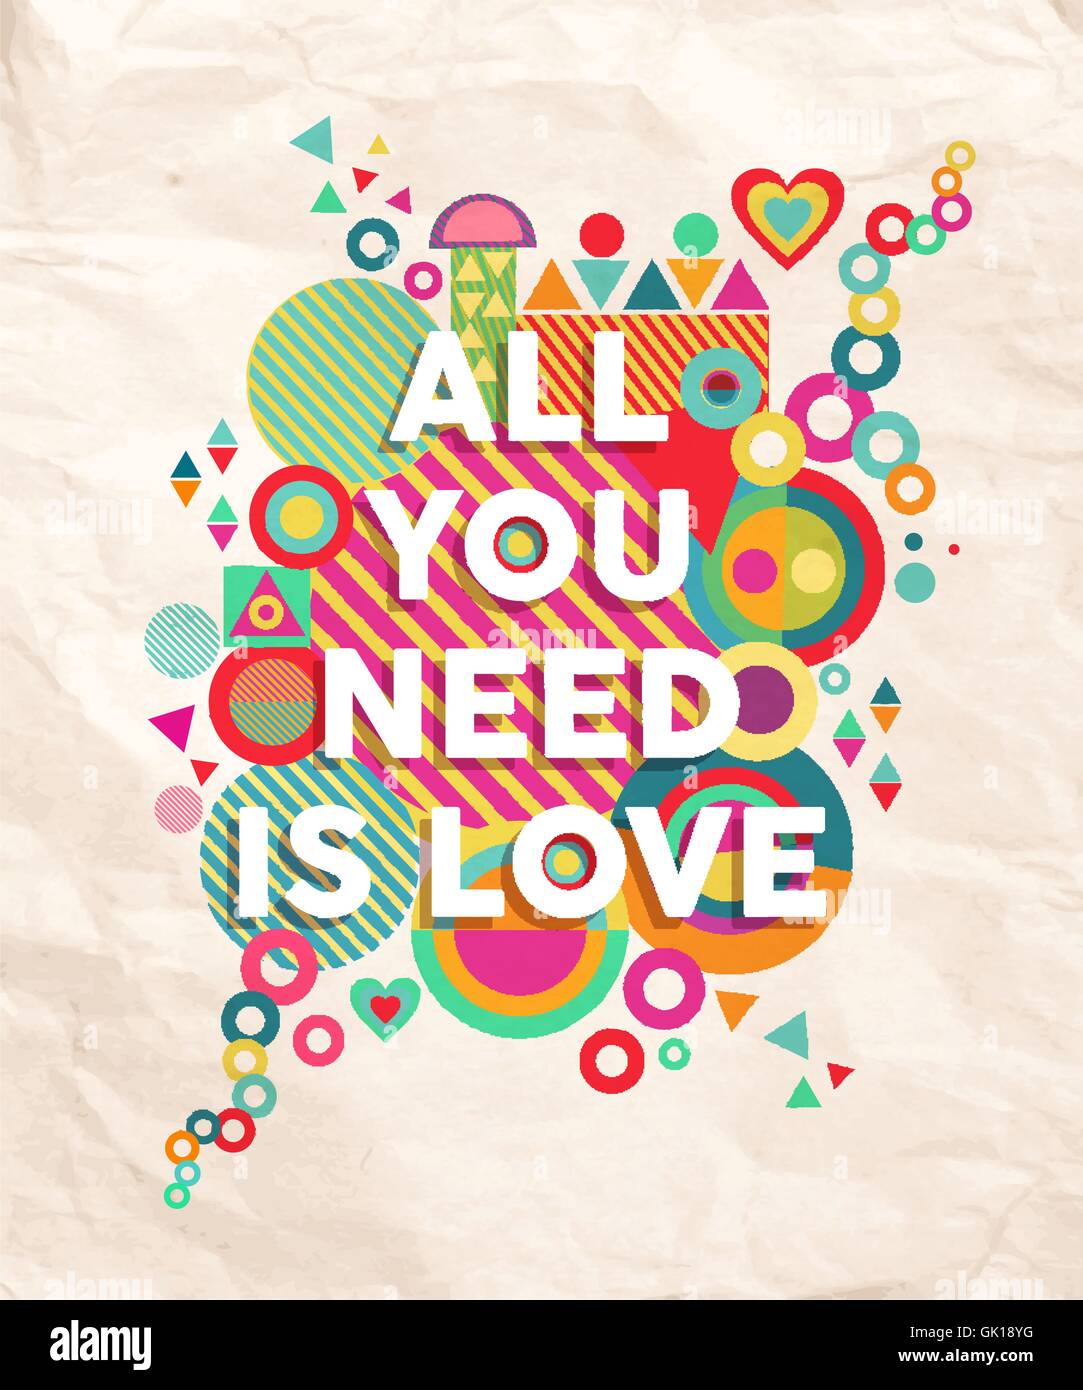 https://c8.alamy.com/comp/GK18YG/all-you-need-is-love-quote-poster-background-GK18YG.jpg